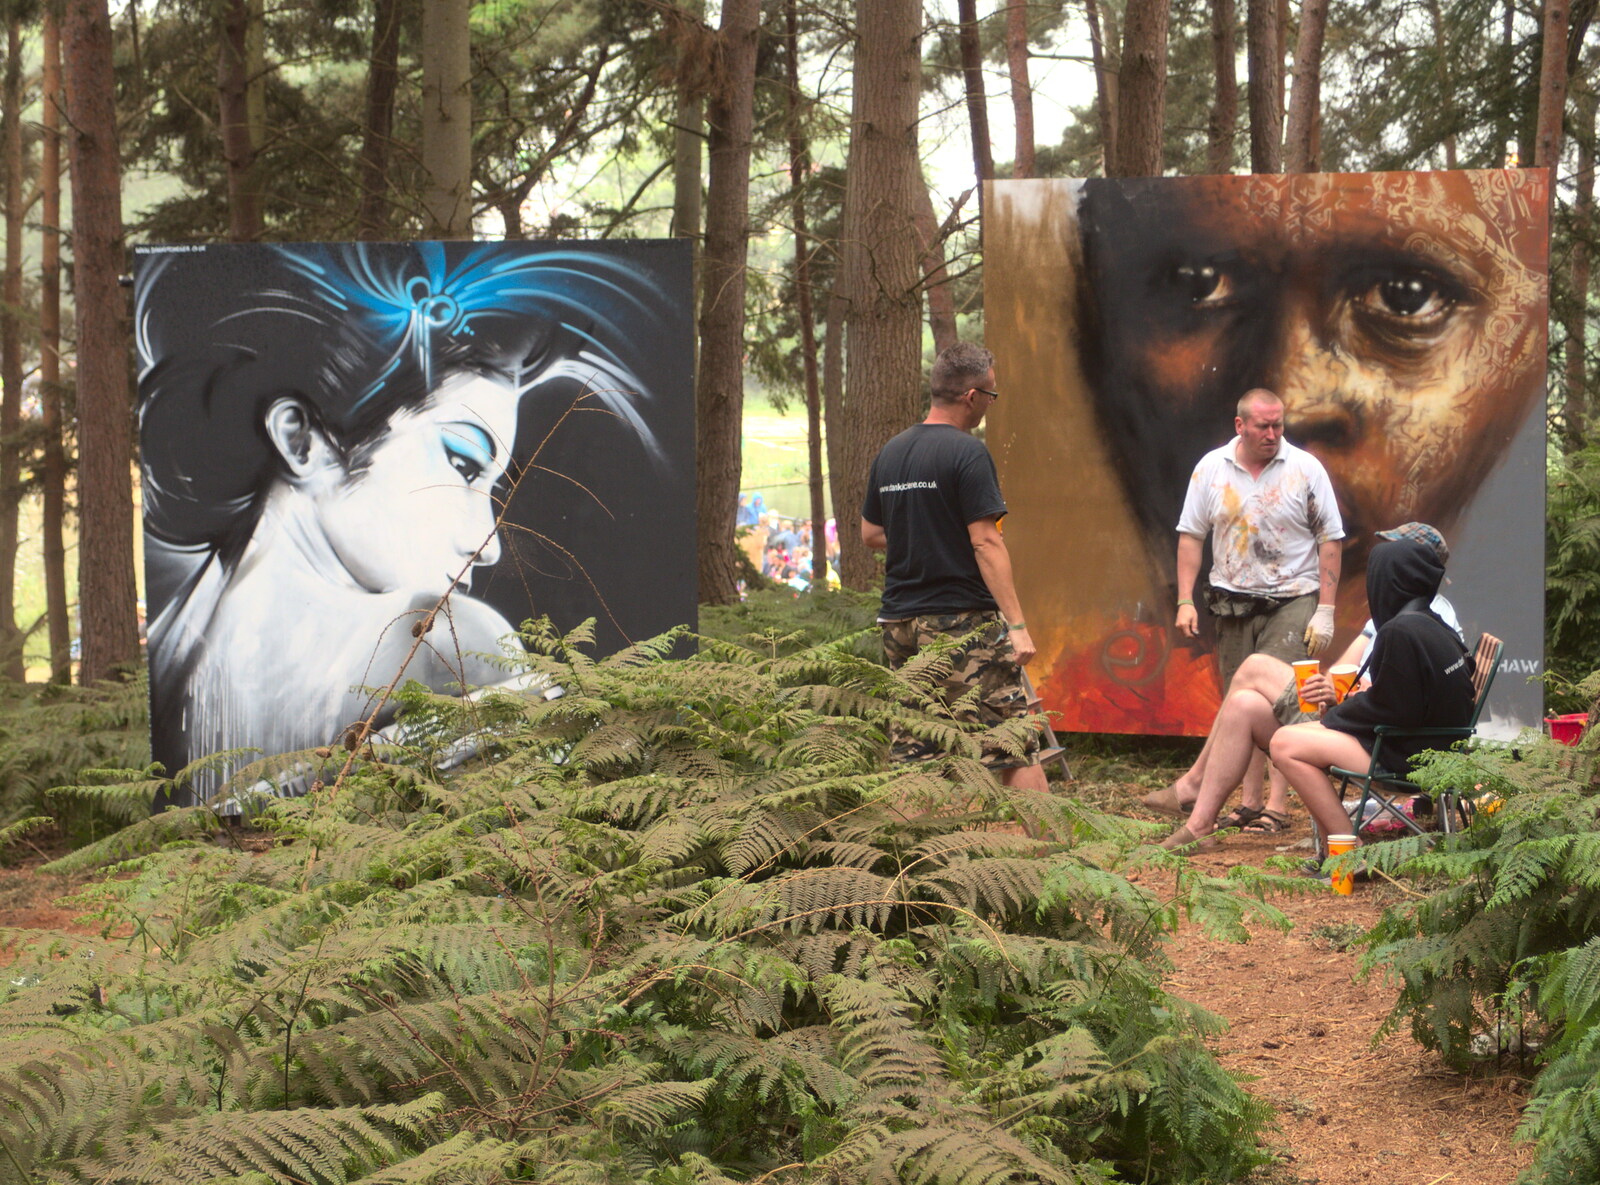 Forest artwork from The 8th Latitude Festival, Henham Park, Southwold, Suffolk - 18th July 2013